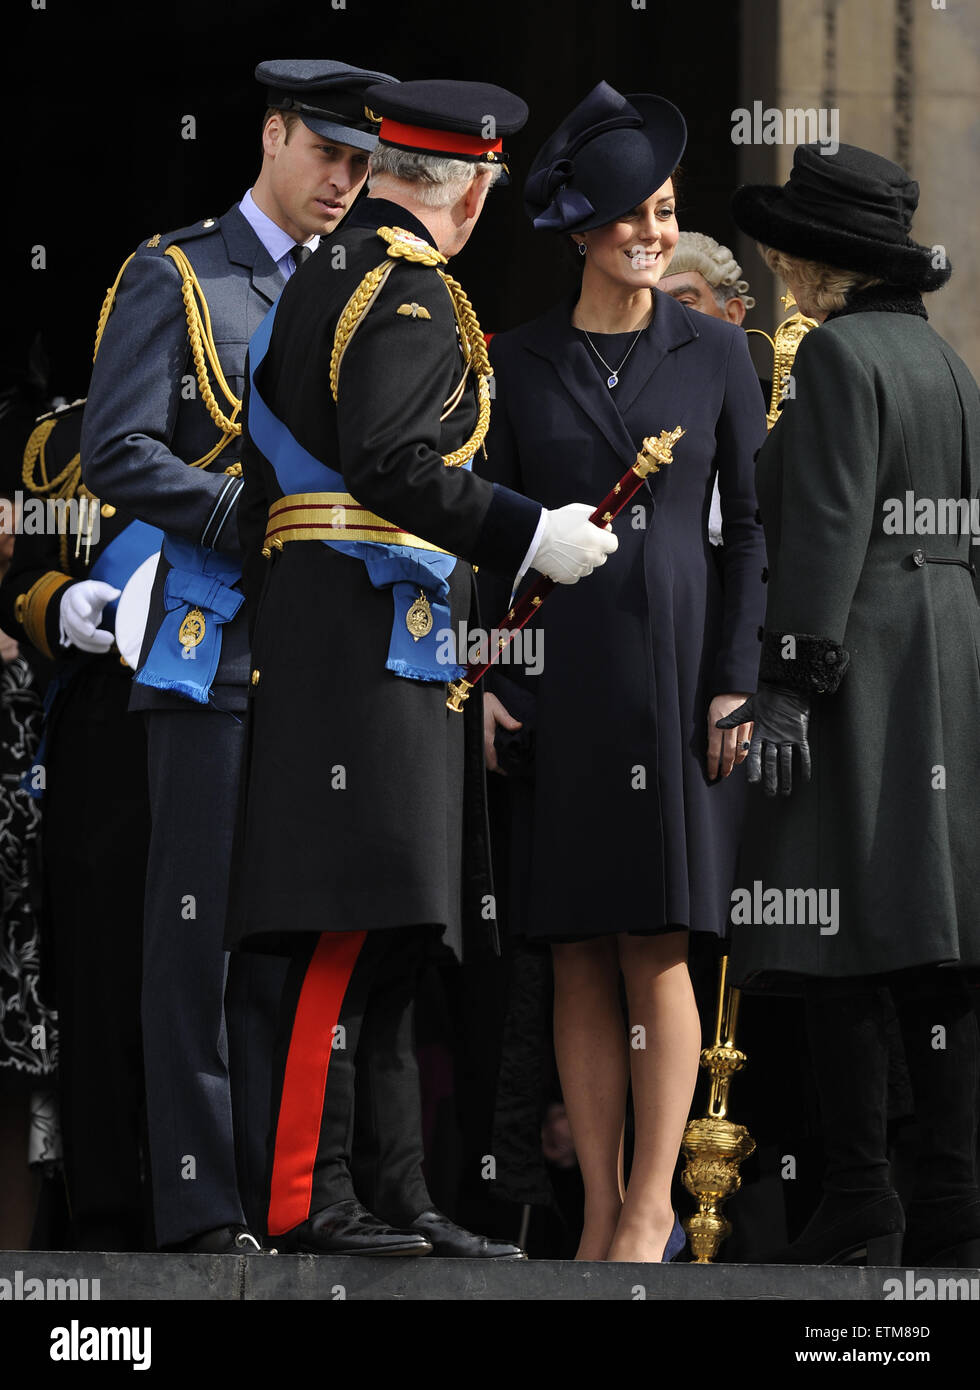 Members of the Royal family  attends the commemoration service to mark the end of combat operations in Afghanistan at St.Paul's Cathedral in London.  Featuring: Camilla Parker-Bowles Duchess of Cornwell, Catherin Duches of Cambridge, Prince William Duke of Cambridge, Prince Charles Prince of Wales Where: London, United Kingdom When: 13 Mar 2015 Credit: Euan Cherry/WENN.com Stock Photo